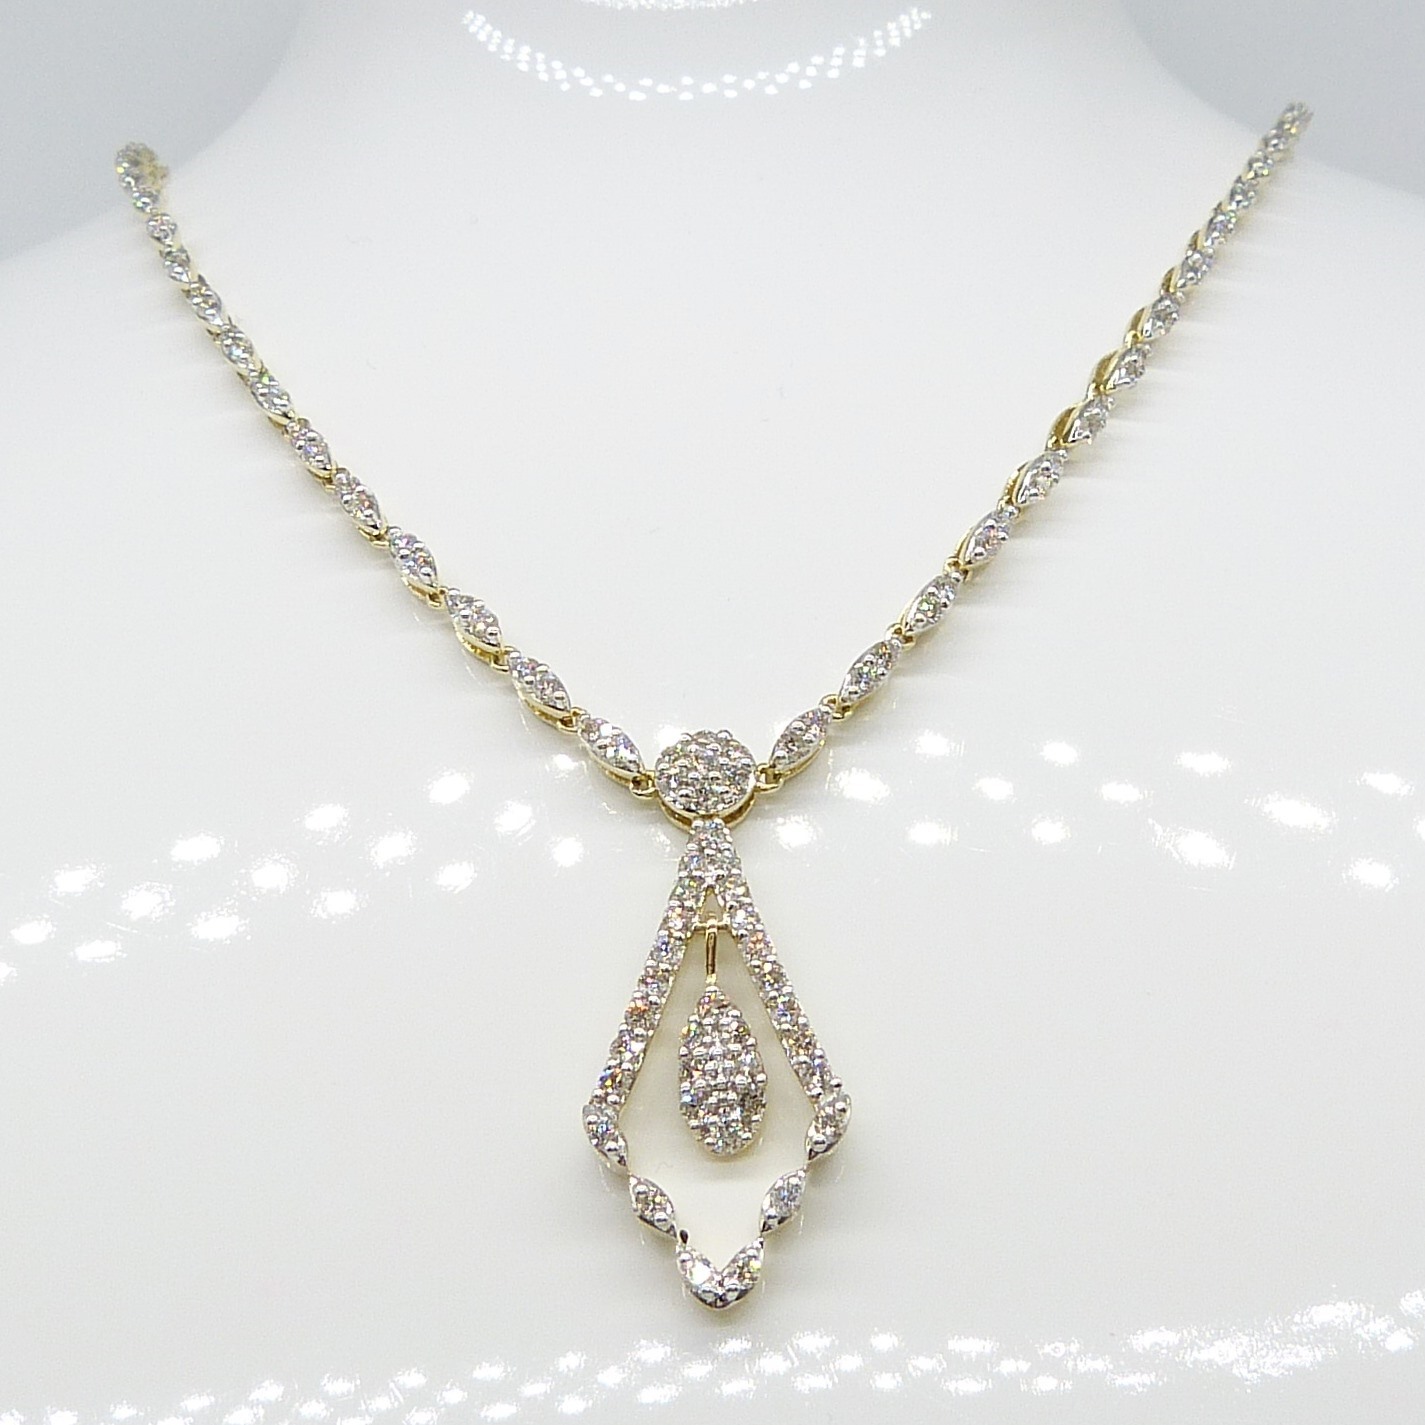 Exquisite Continental-Style Ornate 1.80 Carat Diamond-Set Necklace In 9ct Yellow Gold - Image 2 of 6